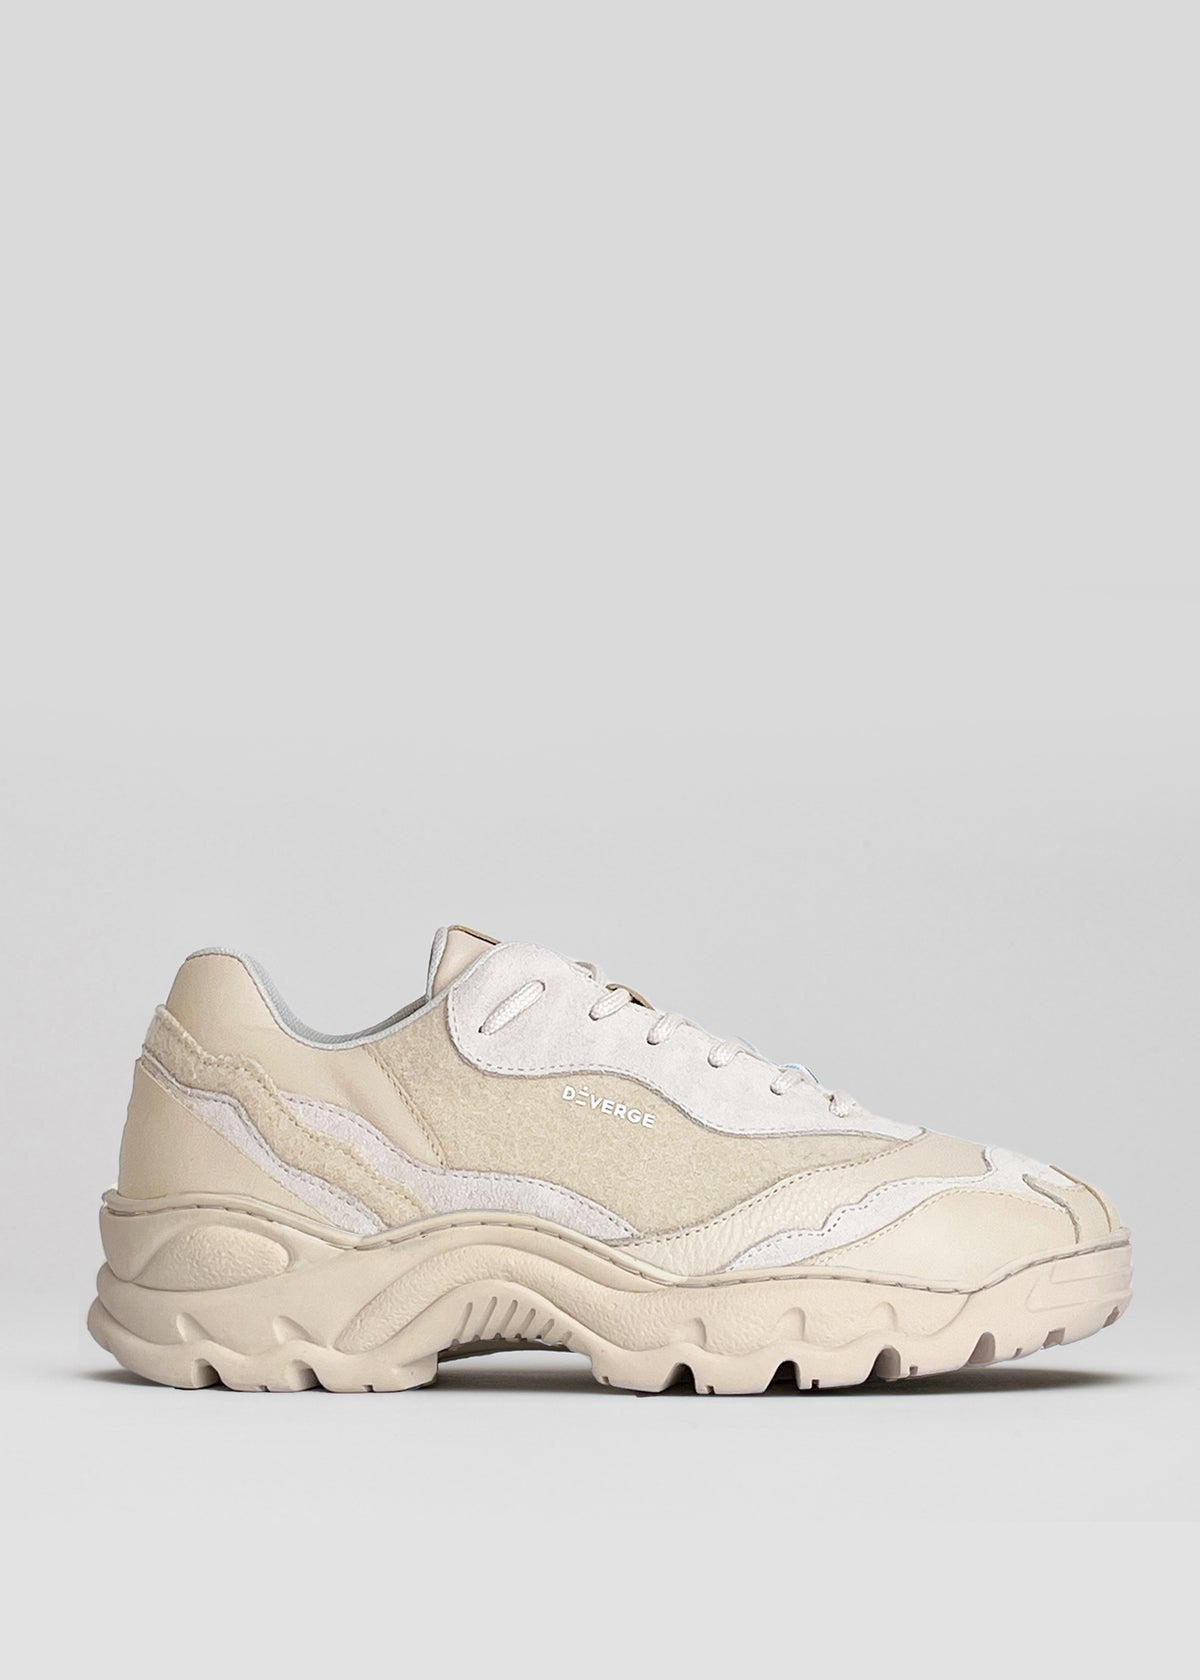 A single DiVERGE X BUREL Pearl low top sneaker with a chunky sole and visible stitched details, displayed against a neutral background.